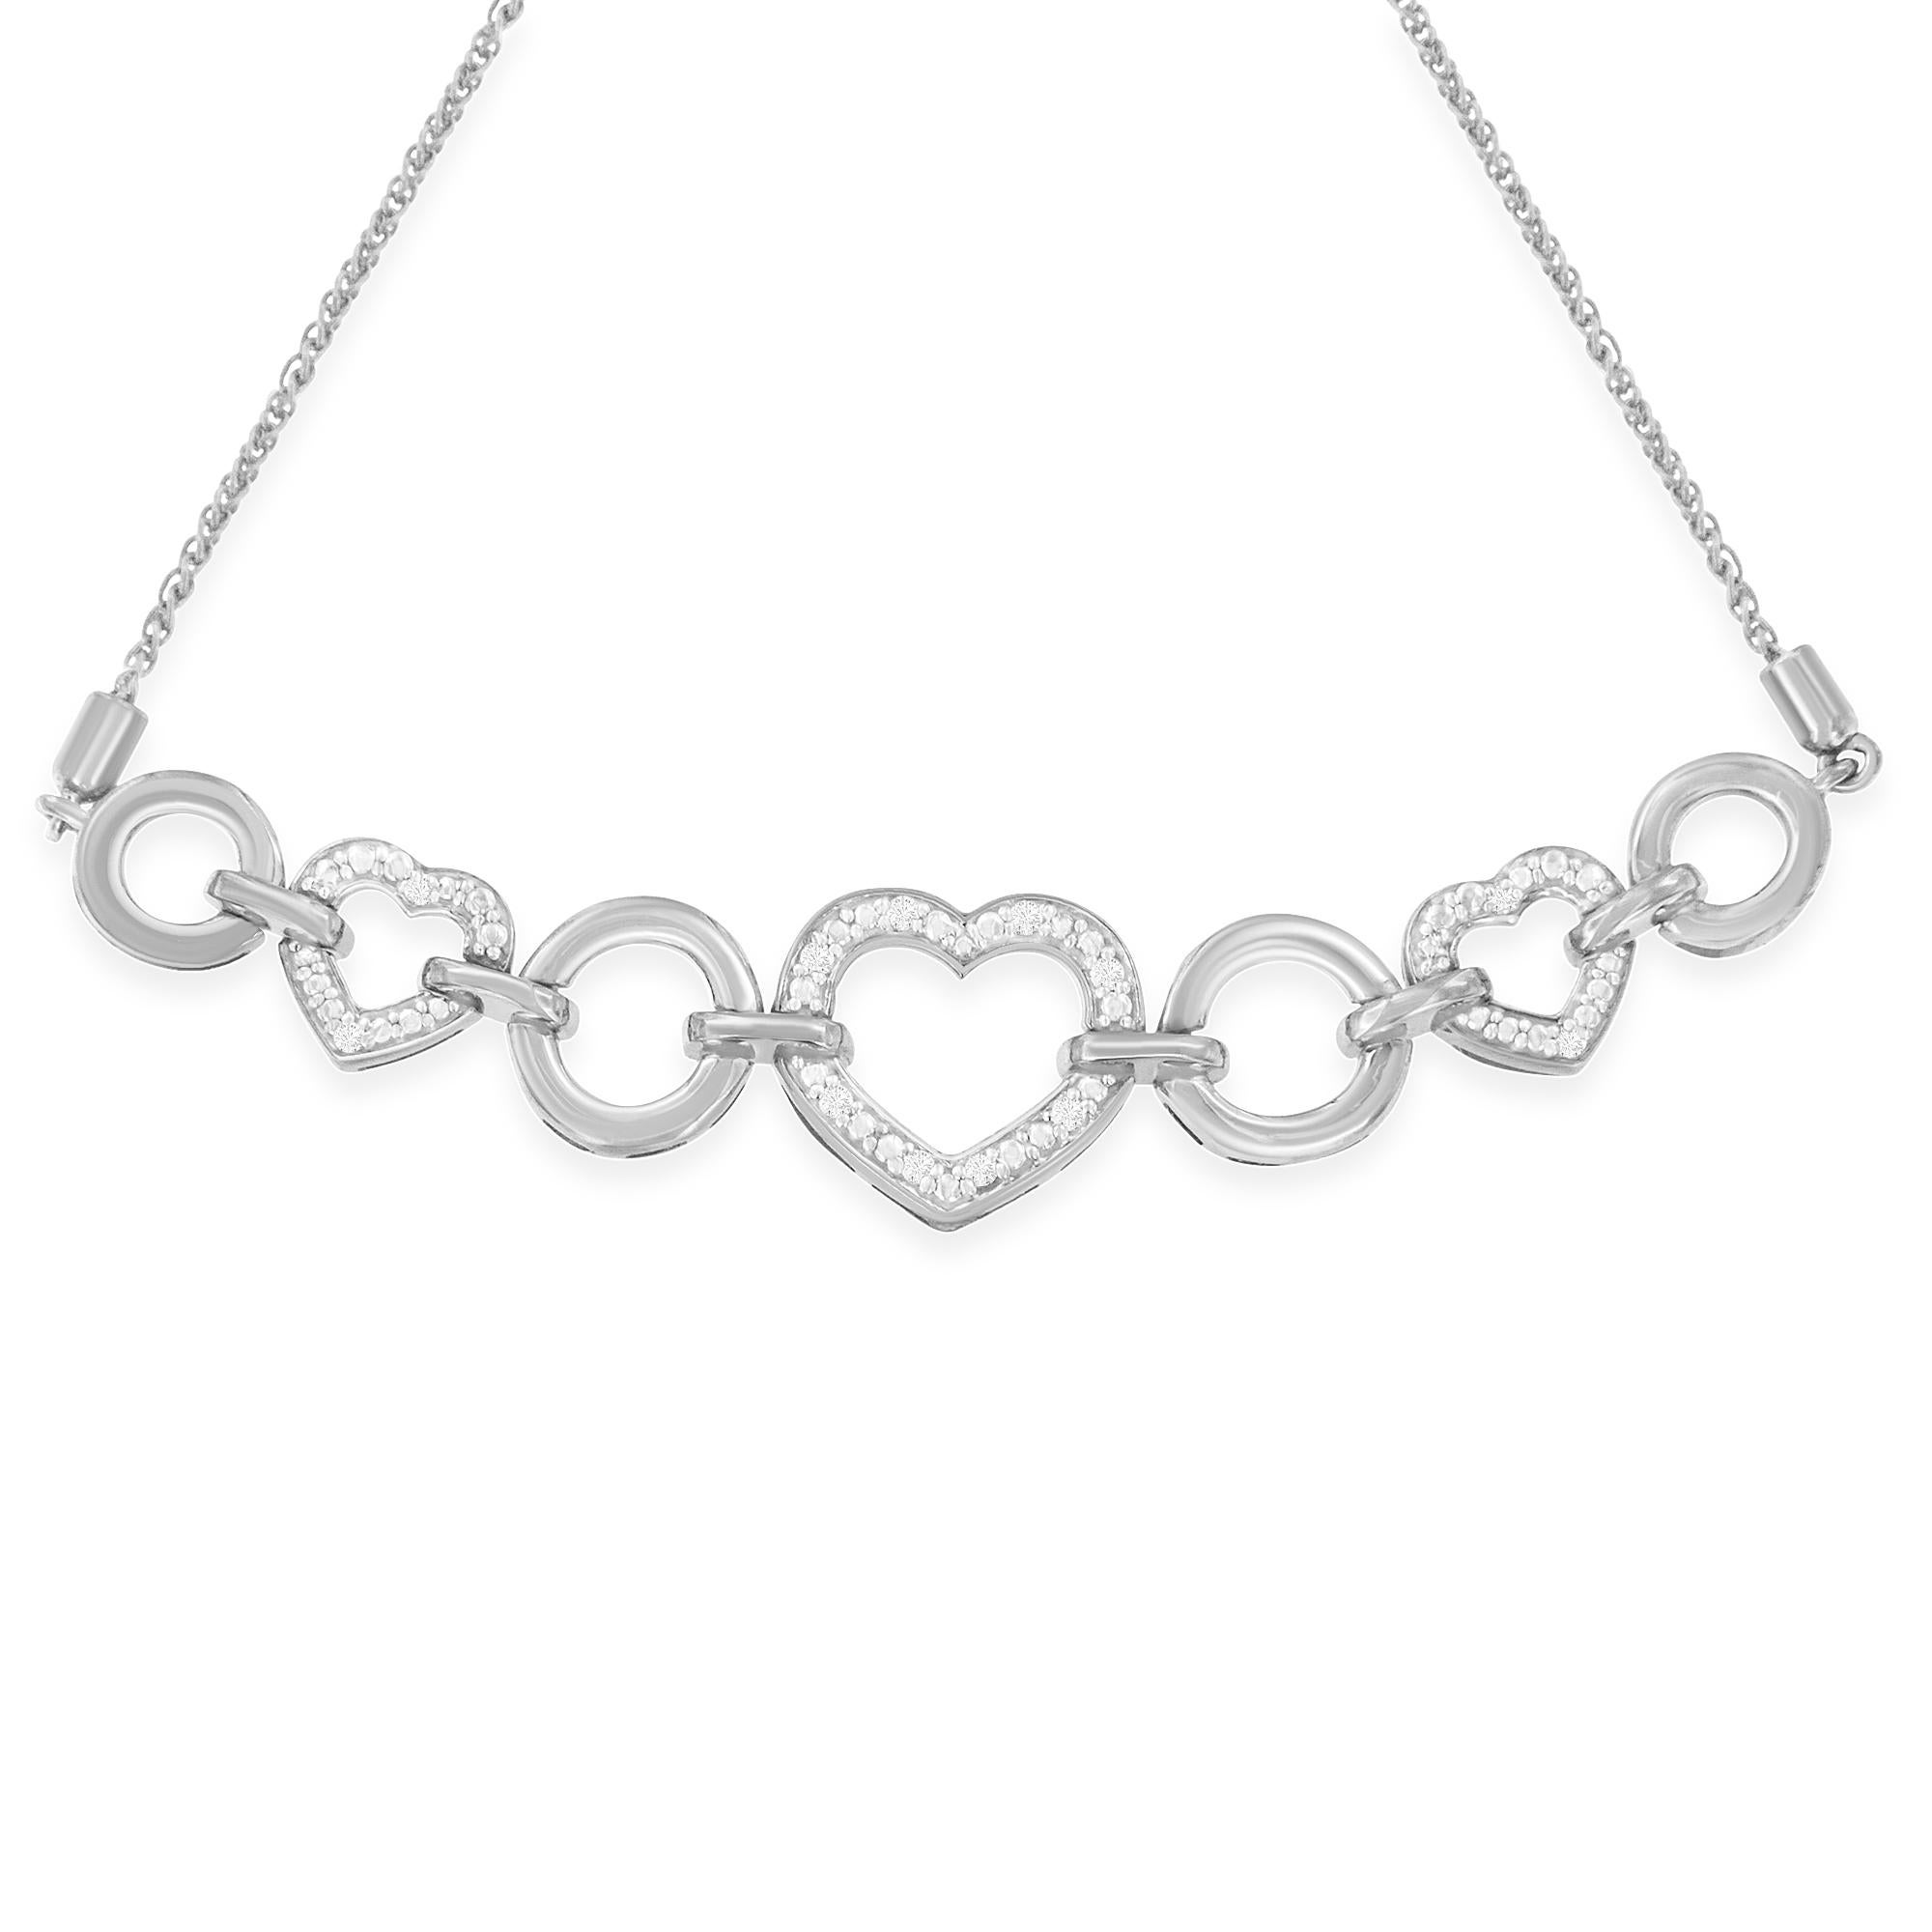 A symbol of your affection, this sparkling diamond heart bolo bracelet is the perfect gift for a special girl of any age. Crafted from cool weaves of .925 sterling silver, this dainty choice features three heart-outline links - touched with diamonds